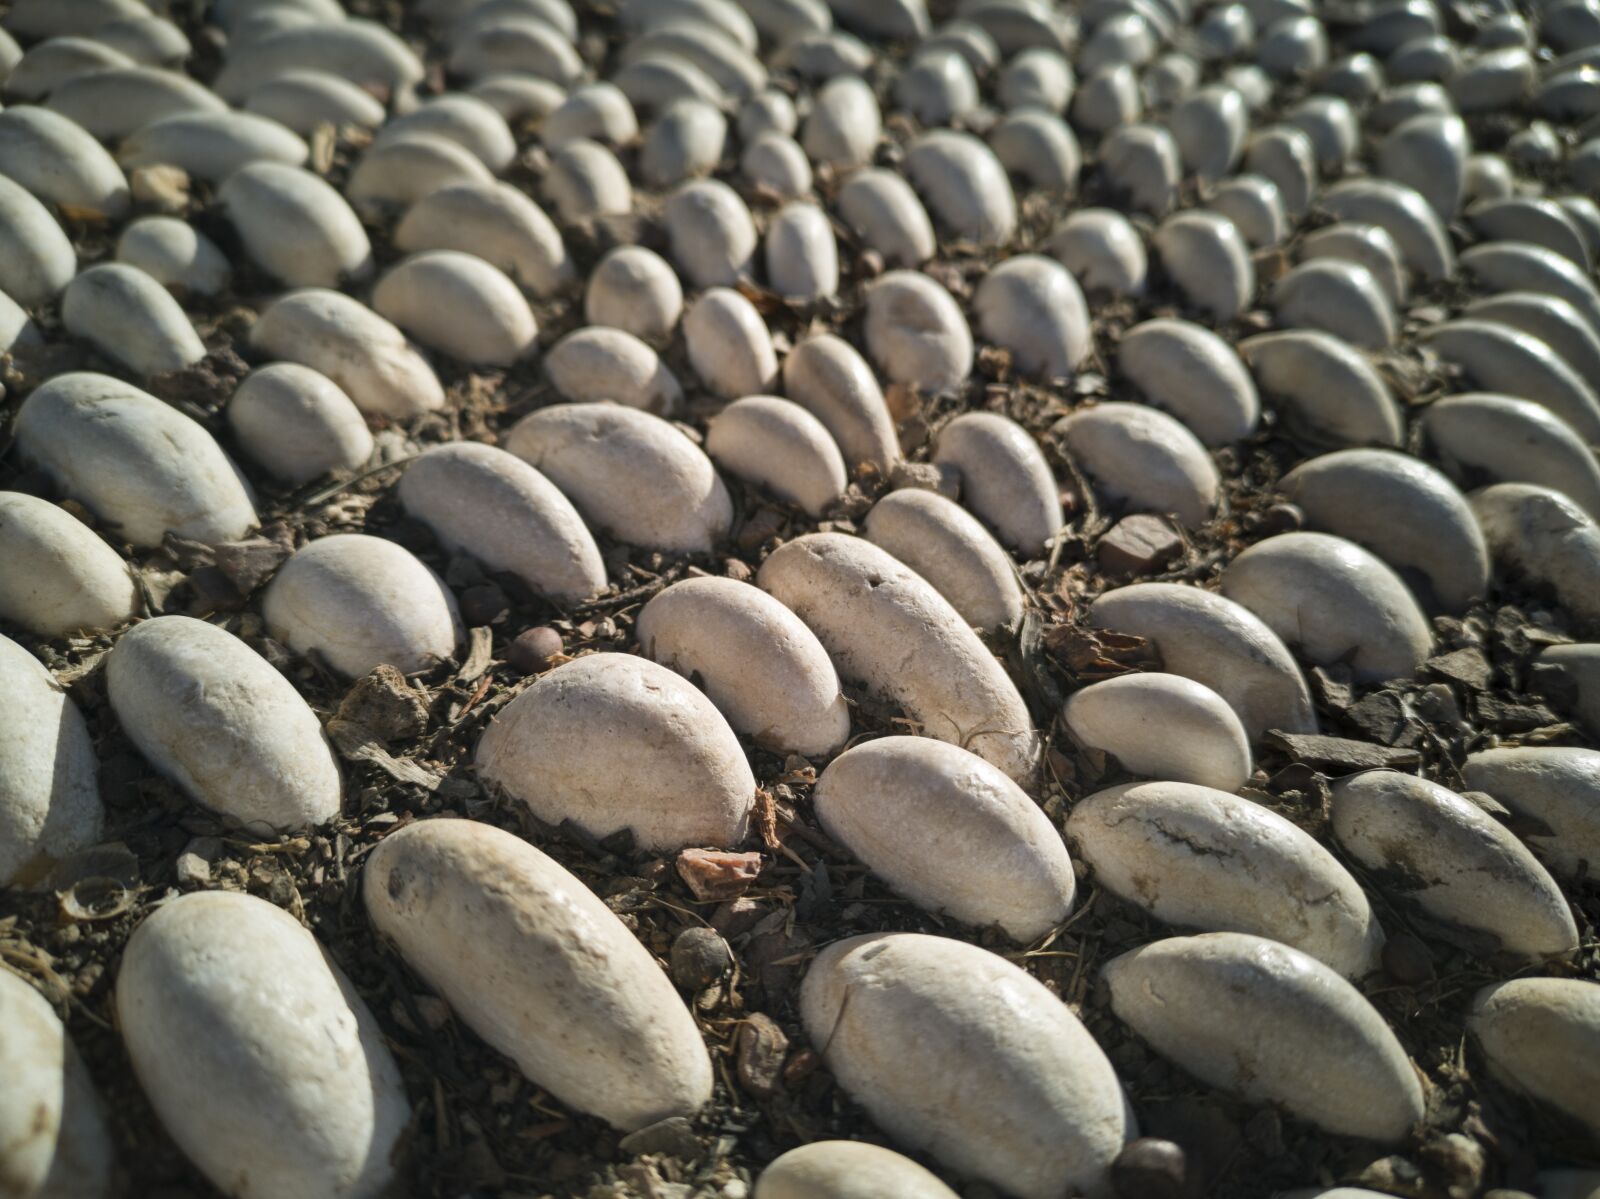 HUAWEI CLT-L09 sample photo. Stone, texture, pattern photography